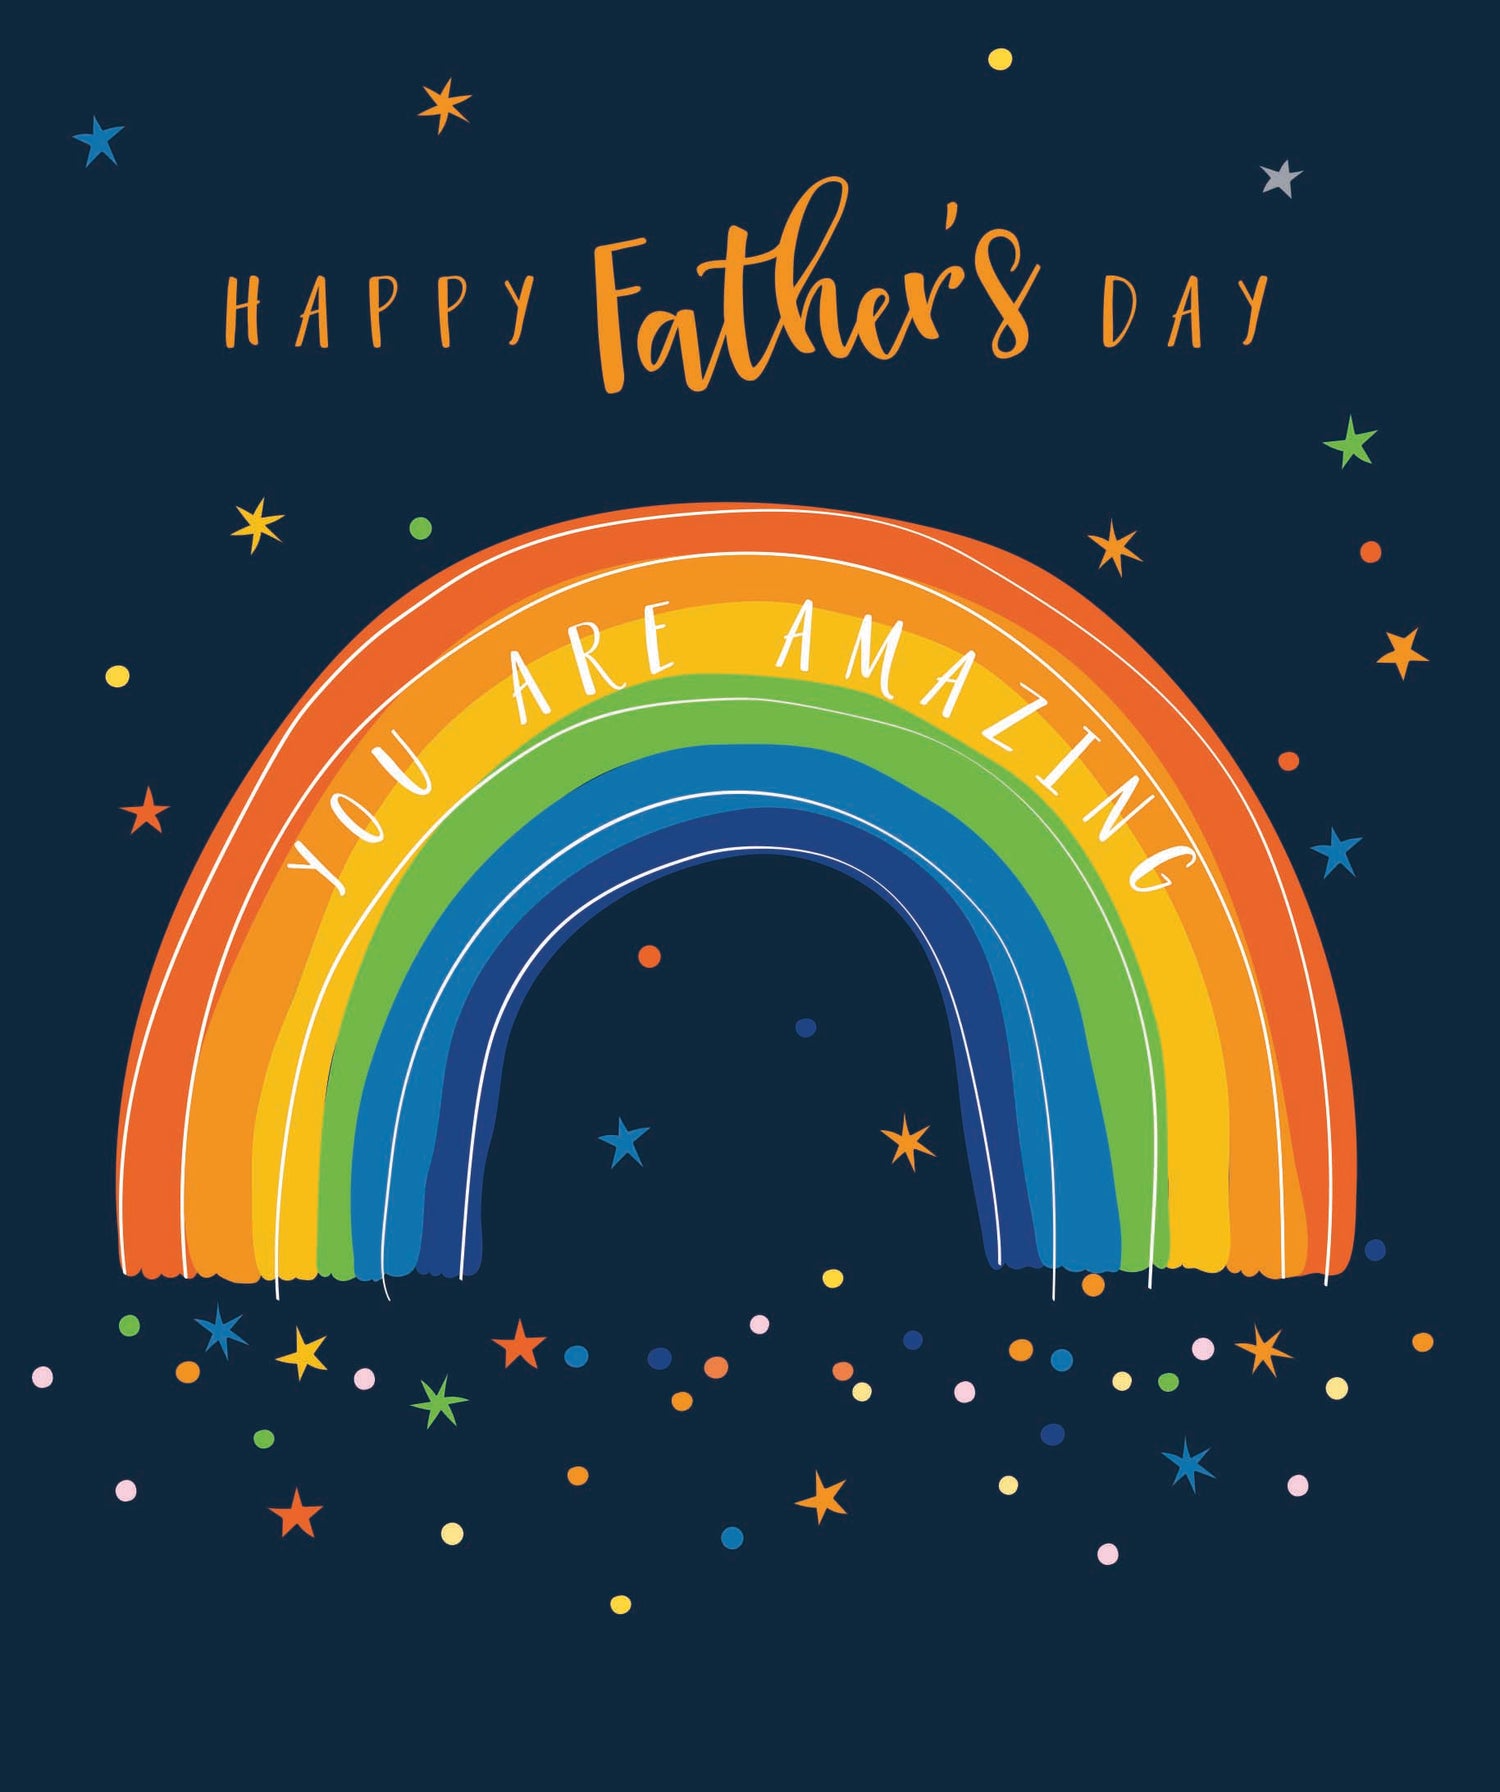 Fathers Day Cards